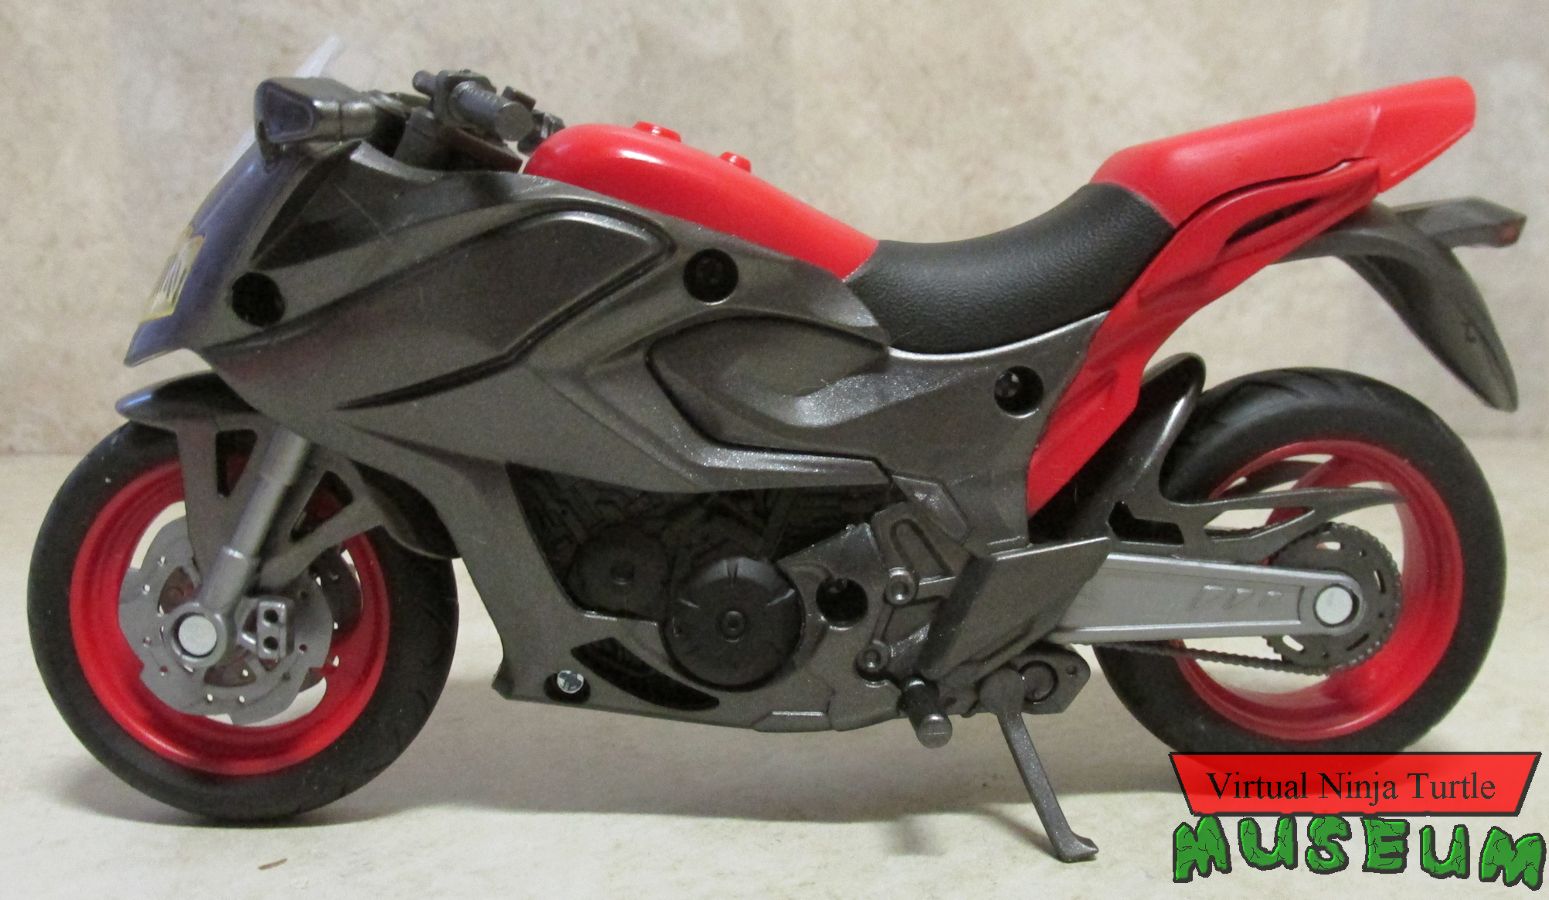 Black Widow's motorcycle right side